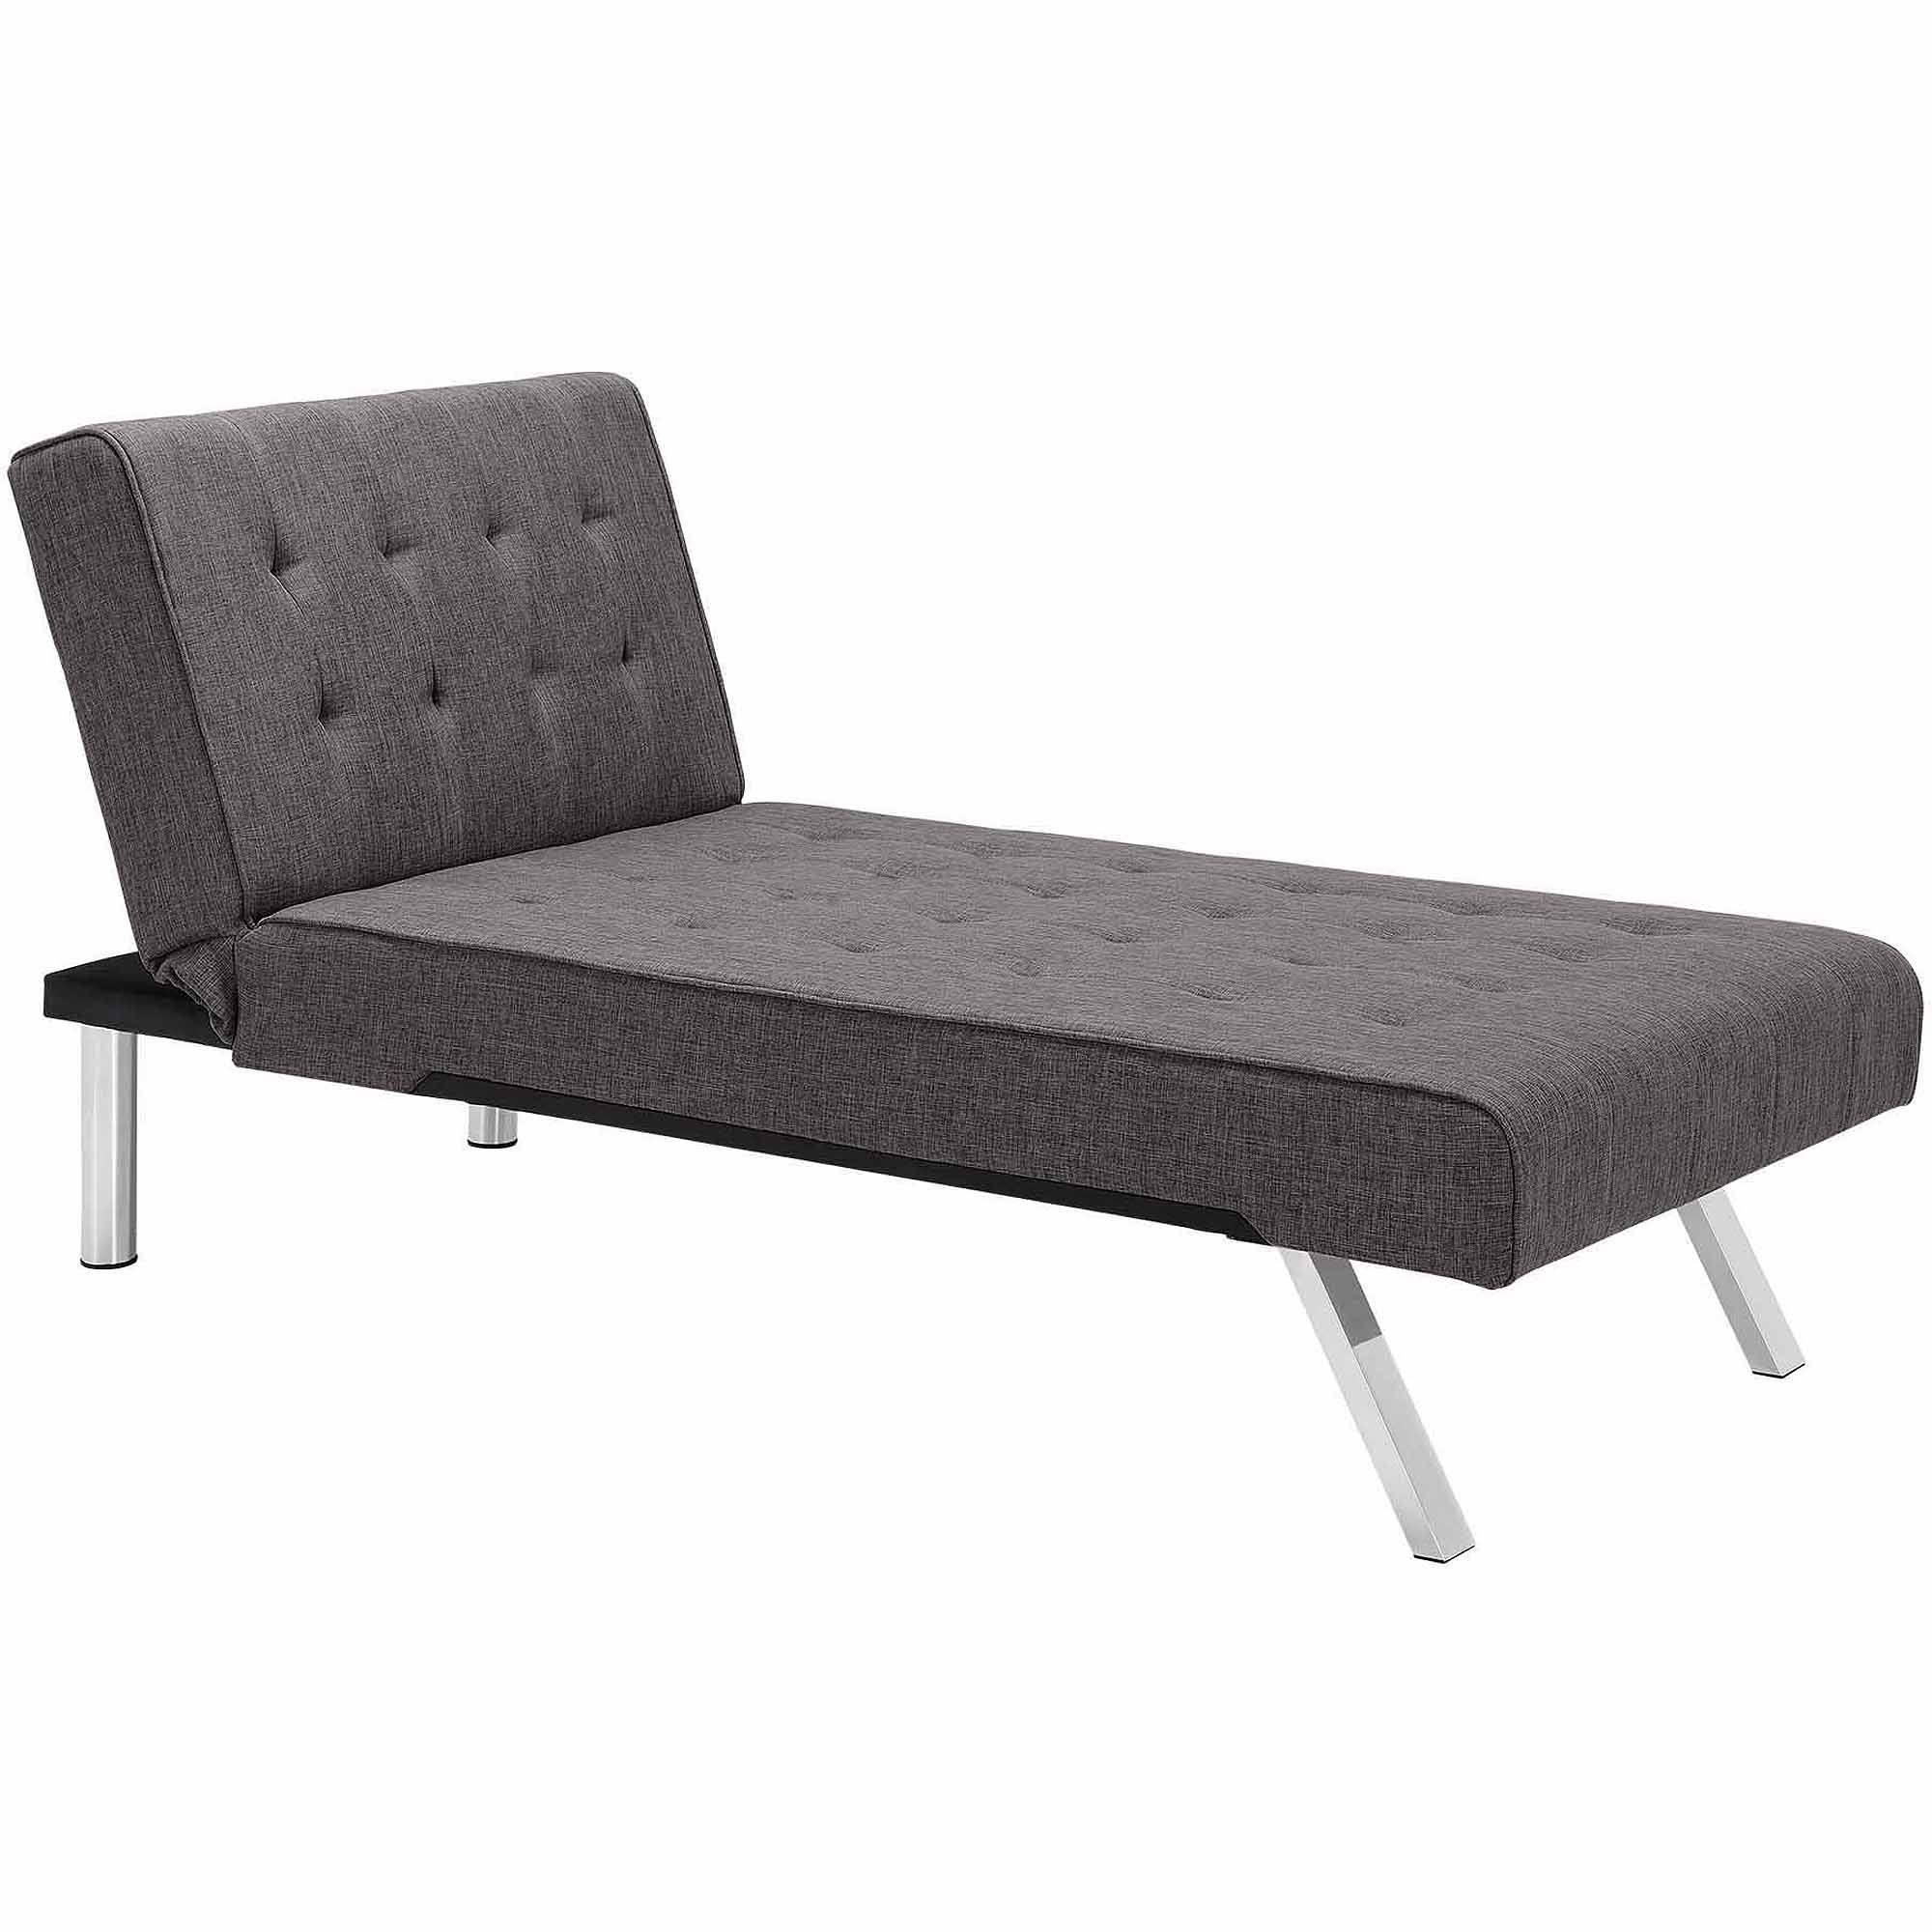 Emily Chaises Inside 2017 Dhp Emily Futon Chaise Lounger, Multiple Colors – Walmart (View 3 of 15)